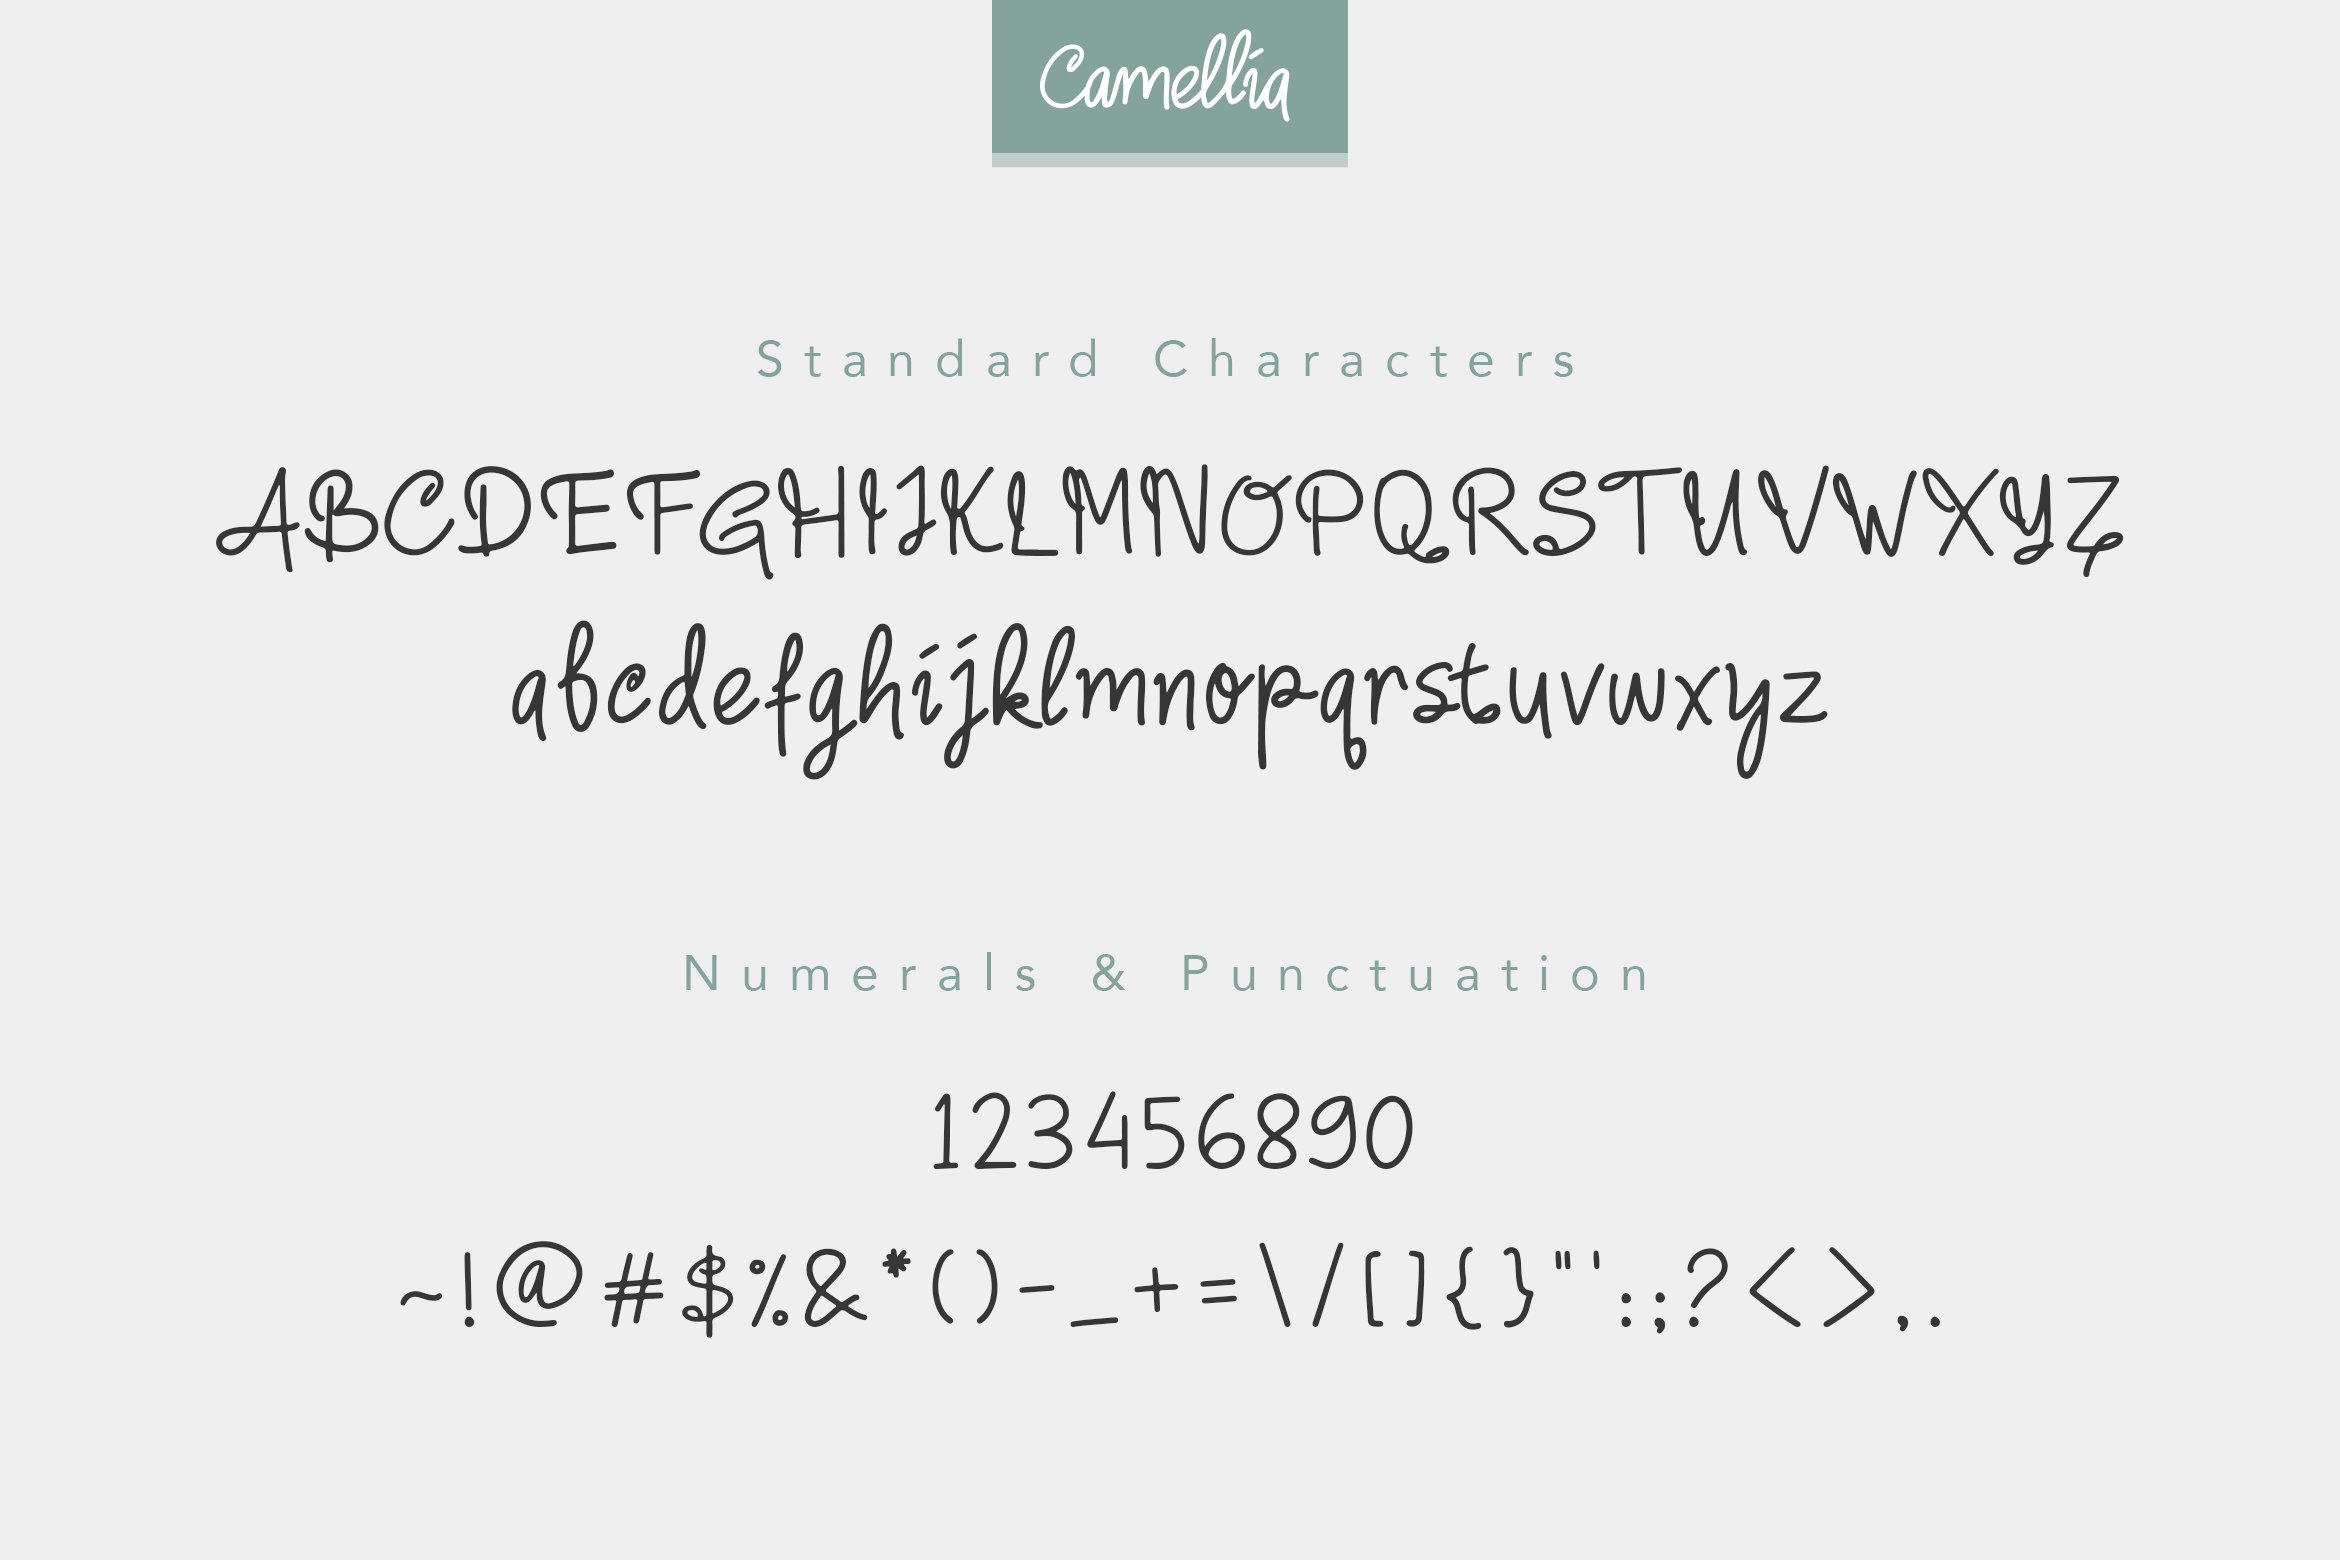 General view of the Camellia font.